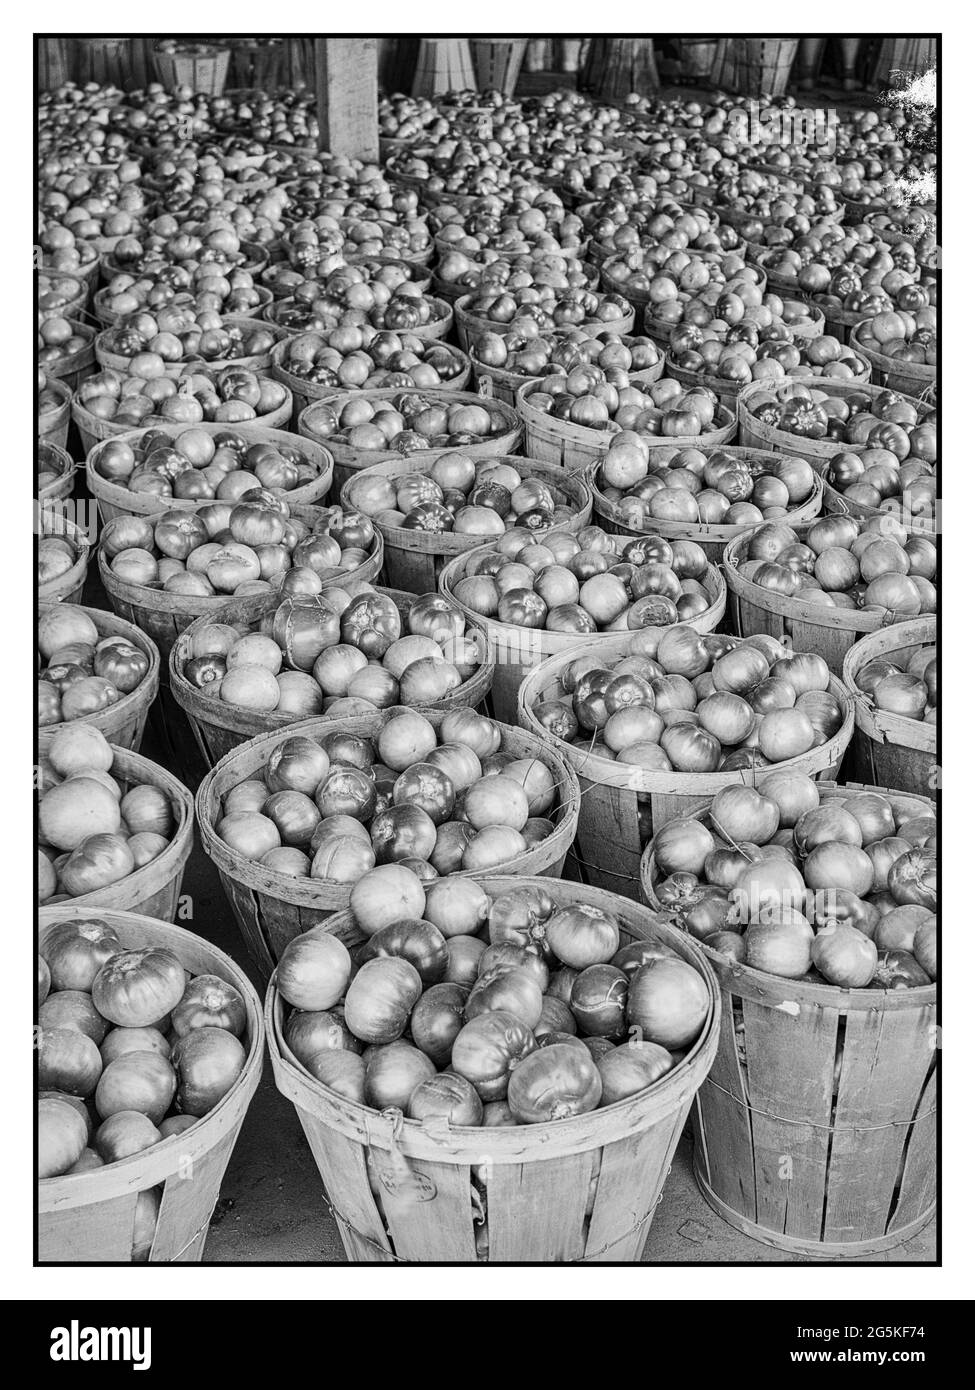 Harvested Tomatoes WW2 on a large scale during World War II at the Kings Creek Packing Company. Kings Creek, Maryland USA Food War administration USA Food Production Jack Delano 1940 July. -  United States--Maryland--Somerset County--Kings Creek Stock Photo